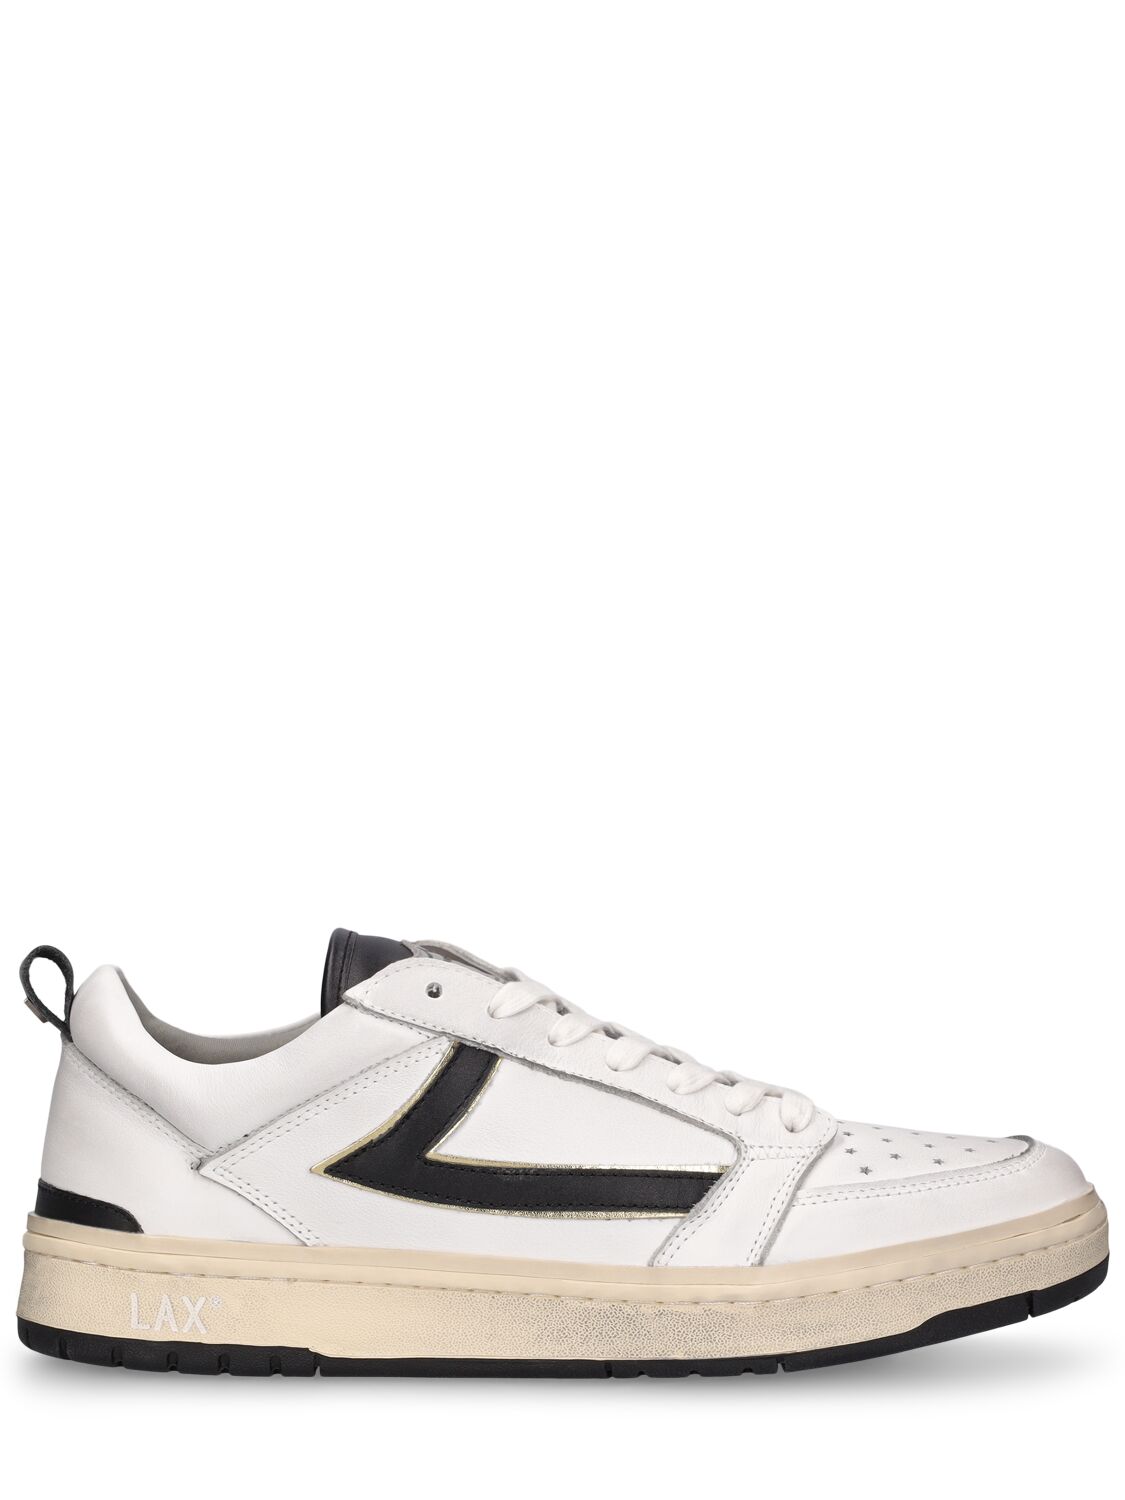 Htc Los Angeles Starlight Leather Low Top Trainers In White,black